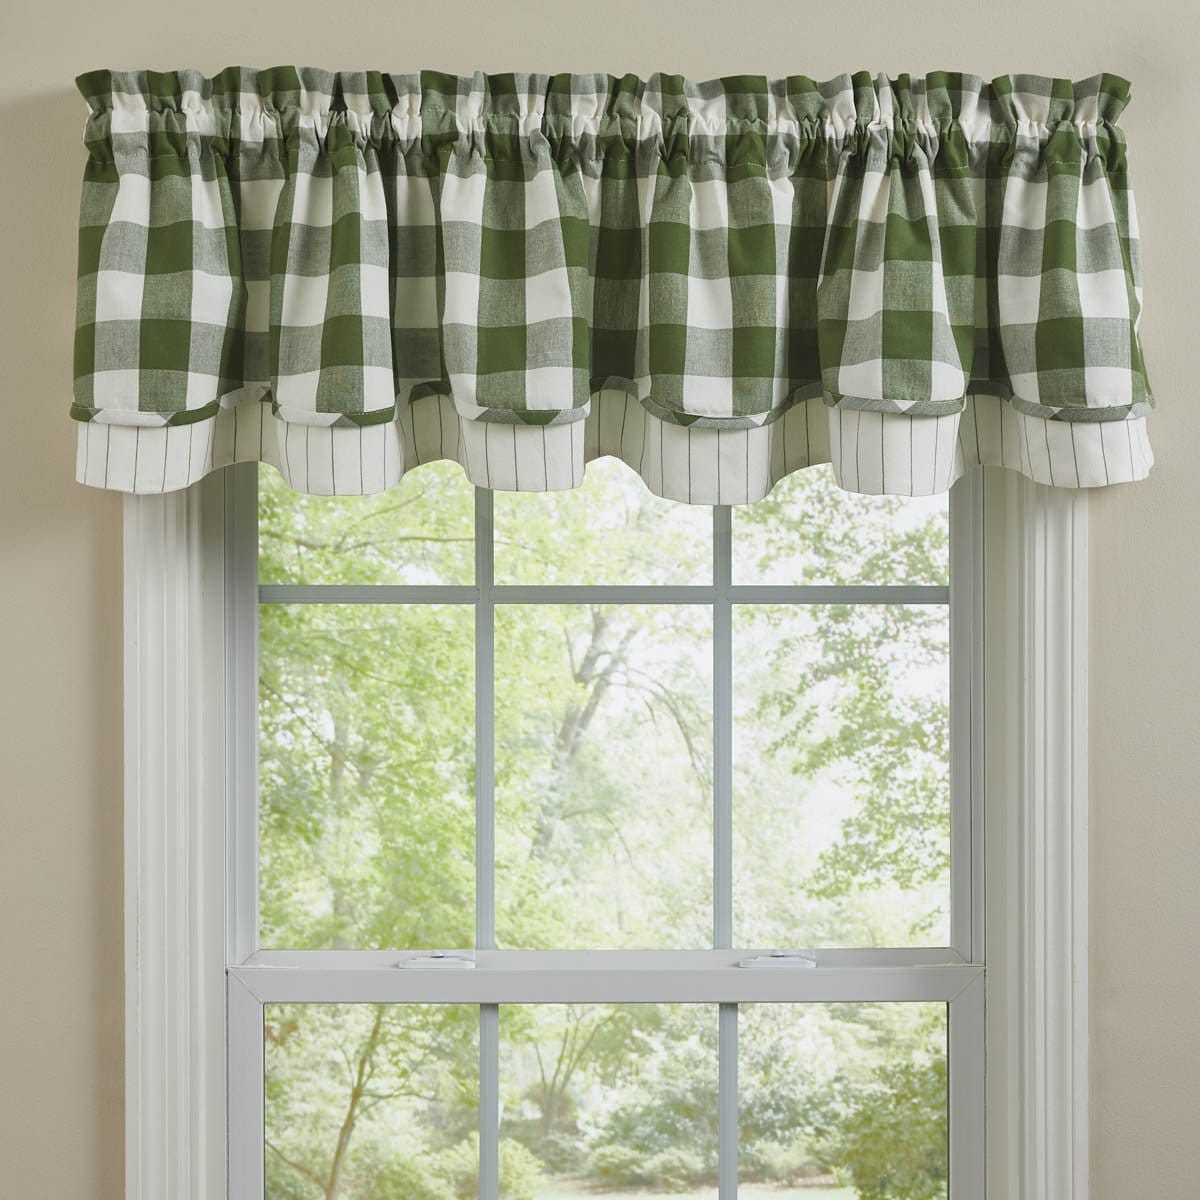 Wicklow Check in Sage Green Layered Valance Lined-Park Designs-The Village Merchant